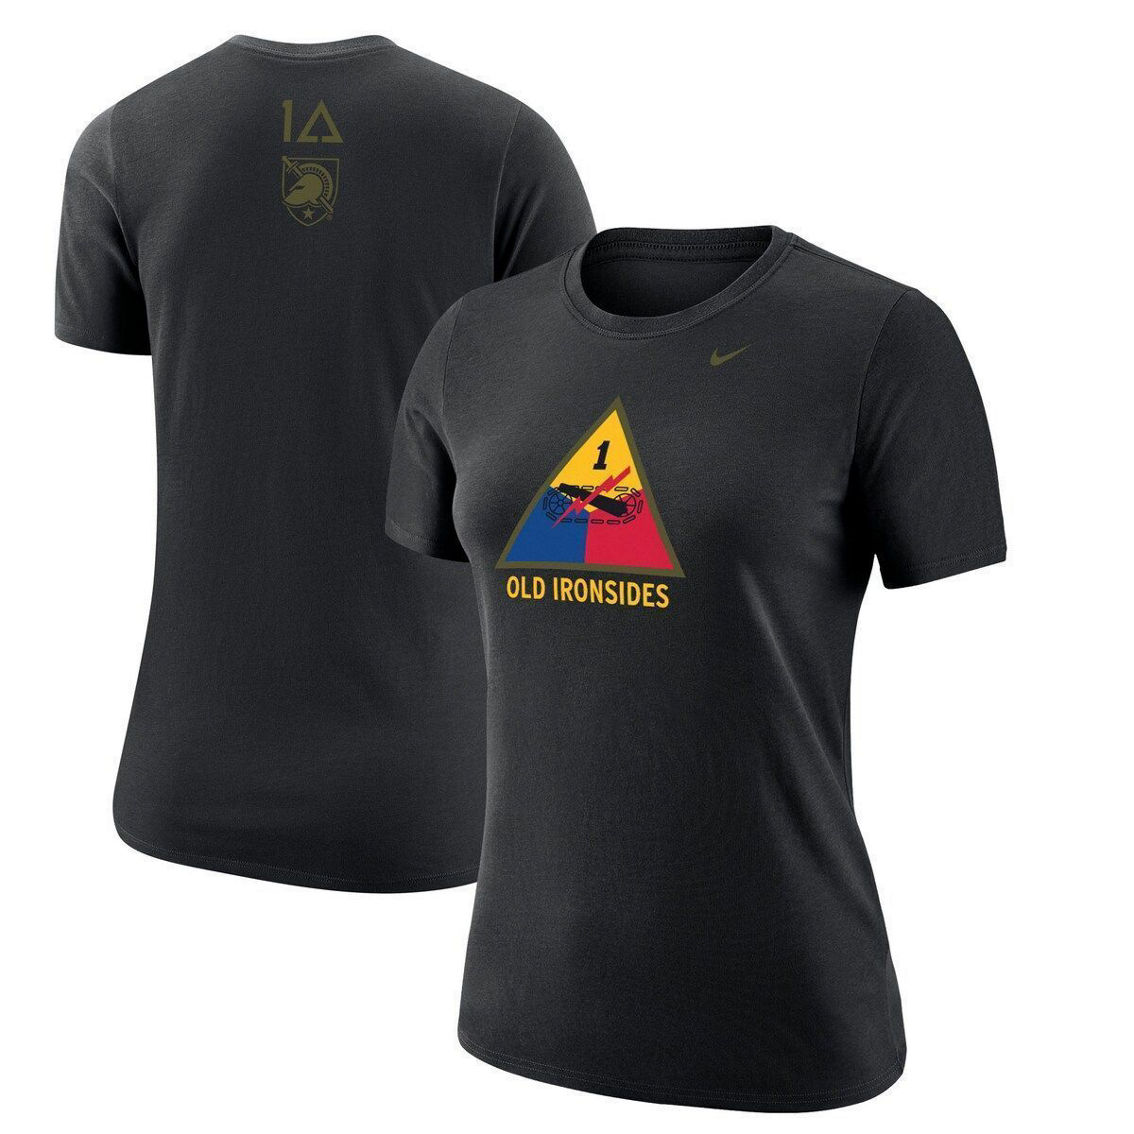 Nike Women's Black Army Black Knights 1st Armored Division Old Ironsides Operation Torch T-Shirt - Image 2 of 4